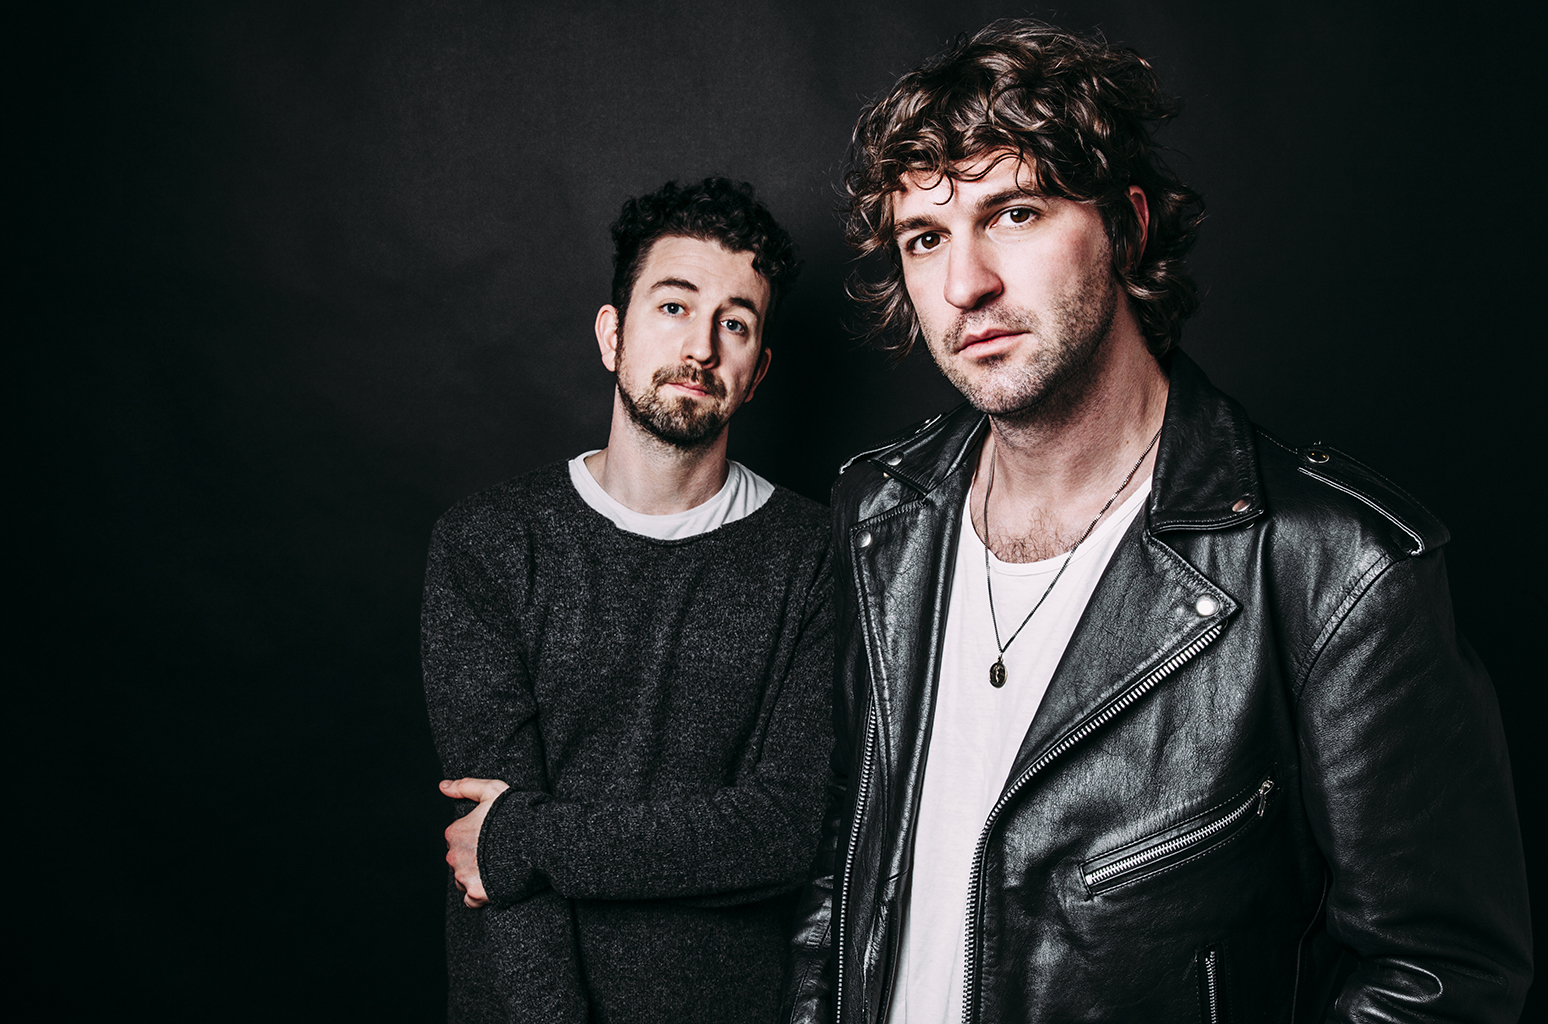 japandroids near to the wild heart of life live